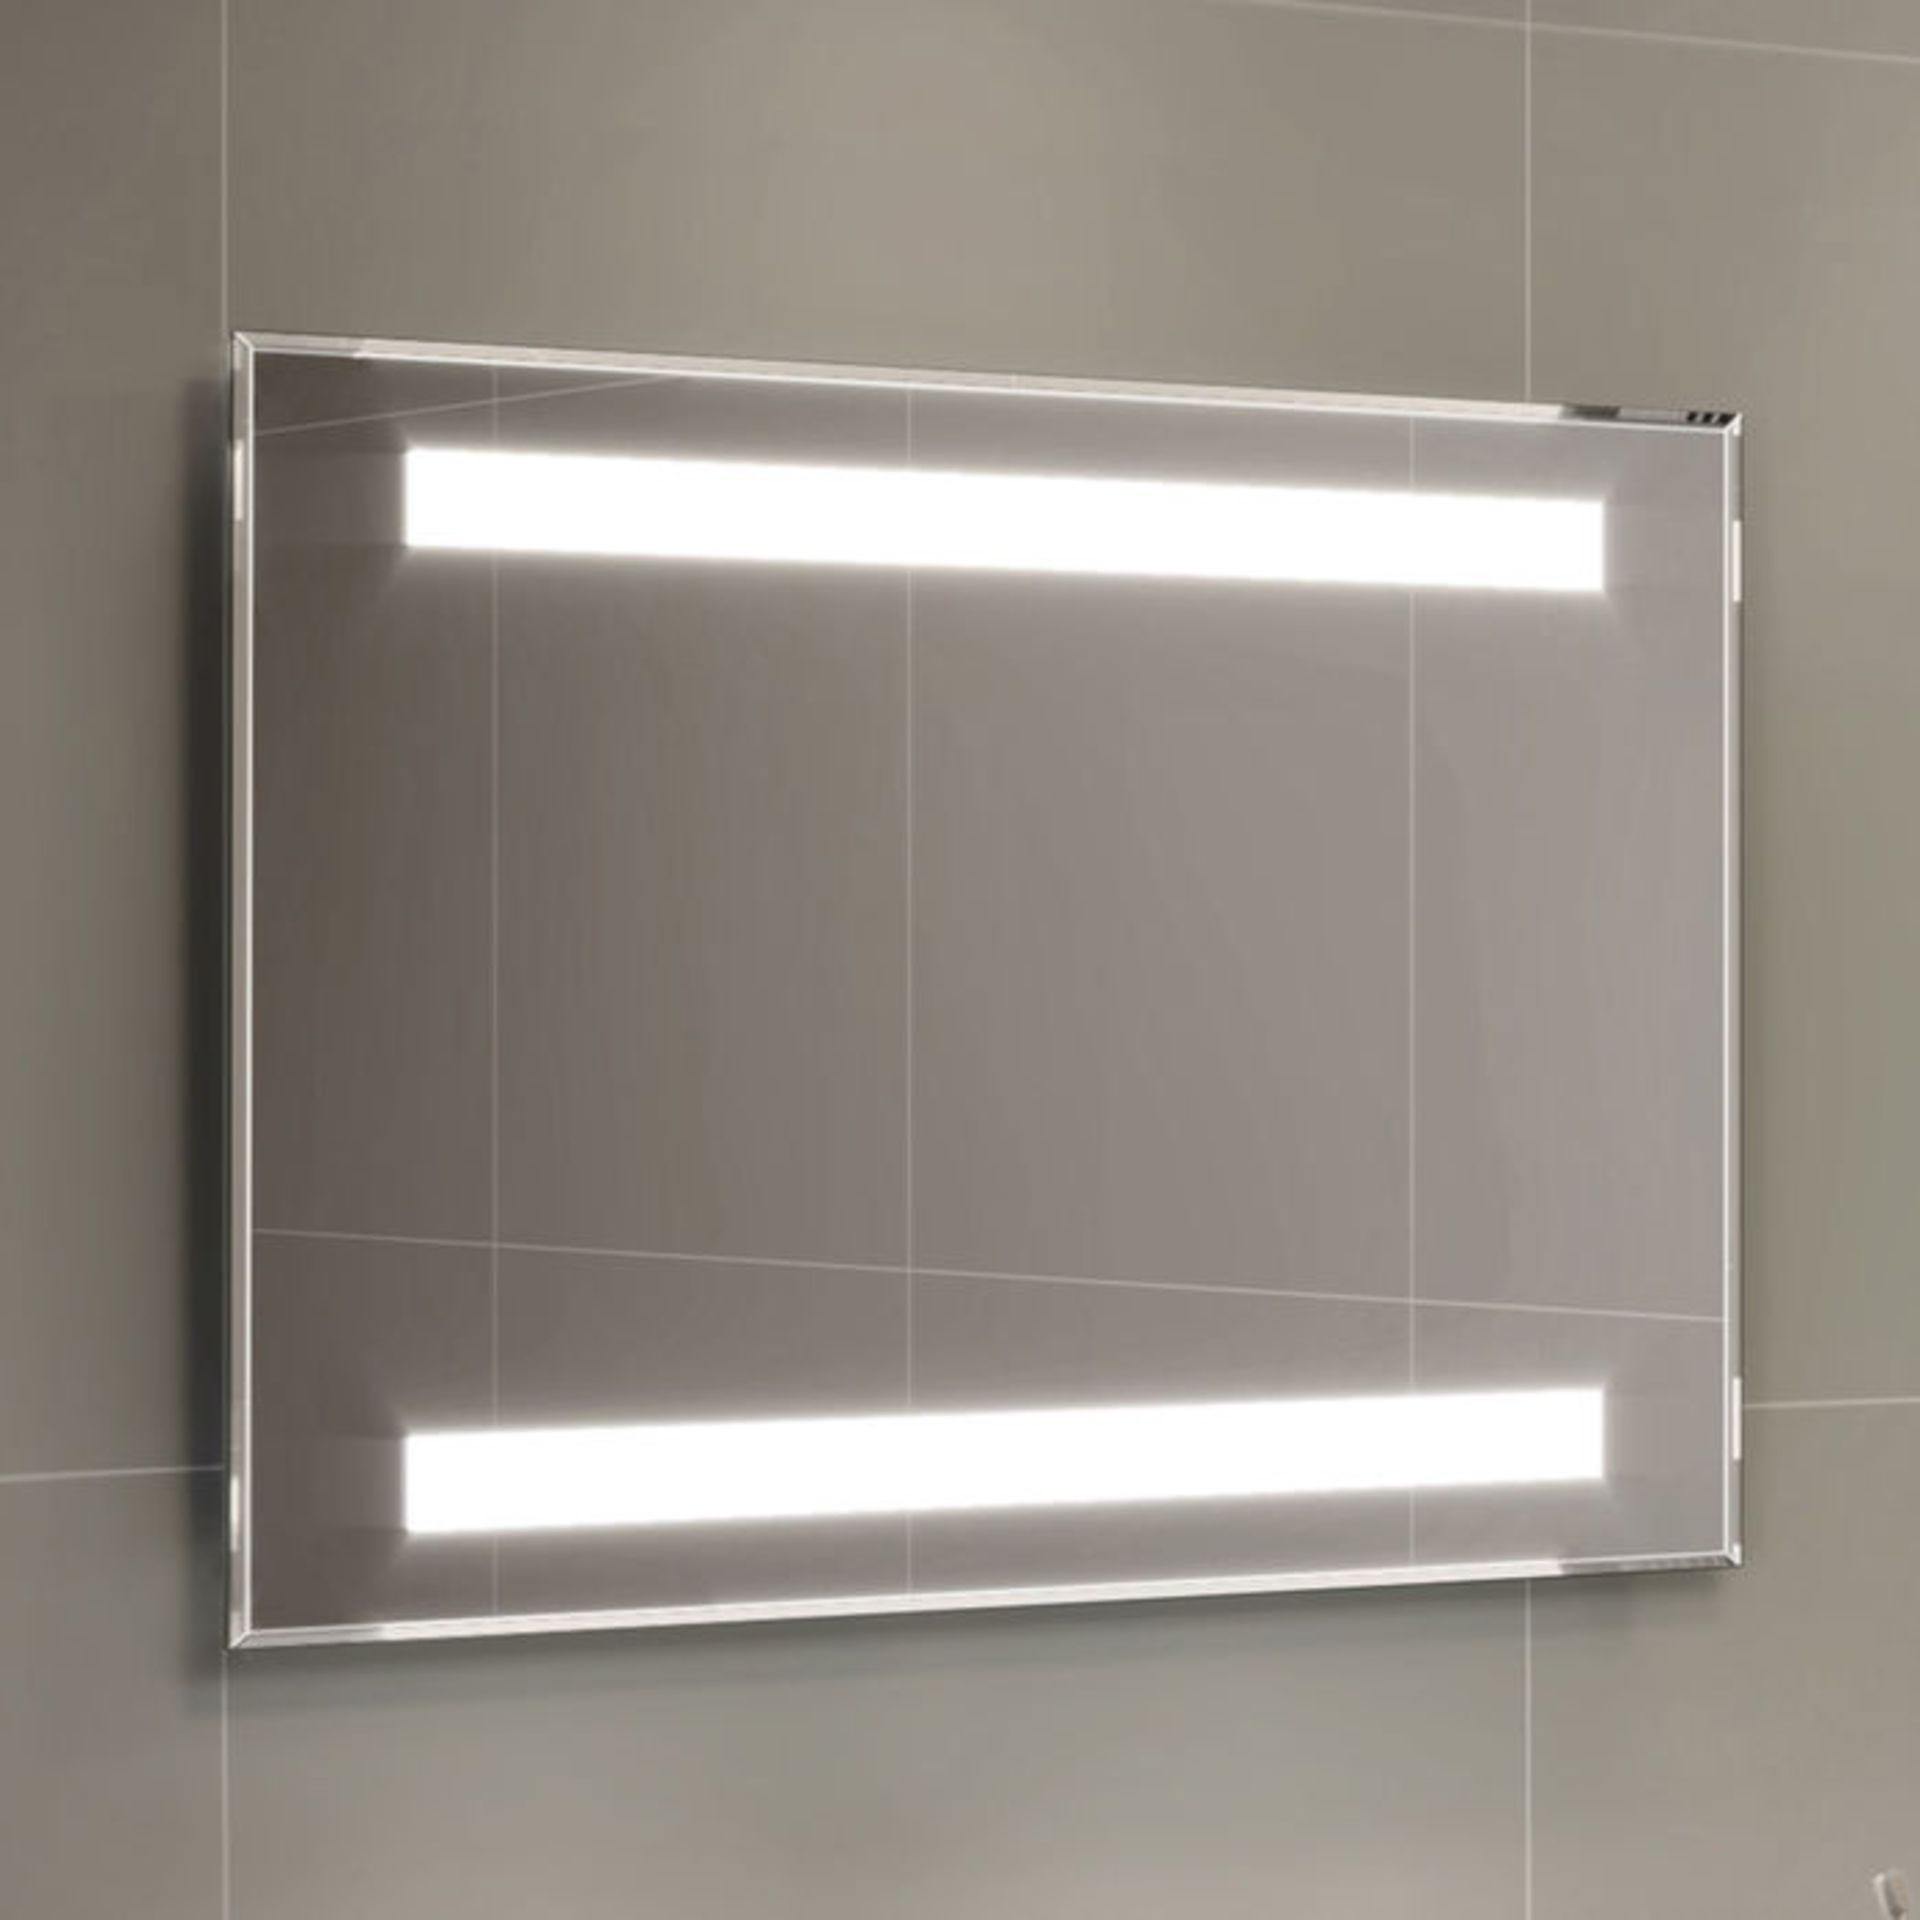 (V155) 500x700mm Omega LED Mirror - Battery Operated. Energy saving controlled On / Off switch - Image 3 of 3